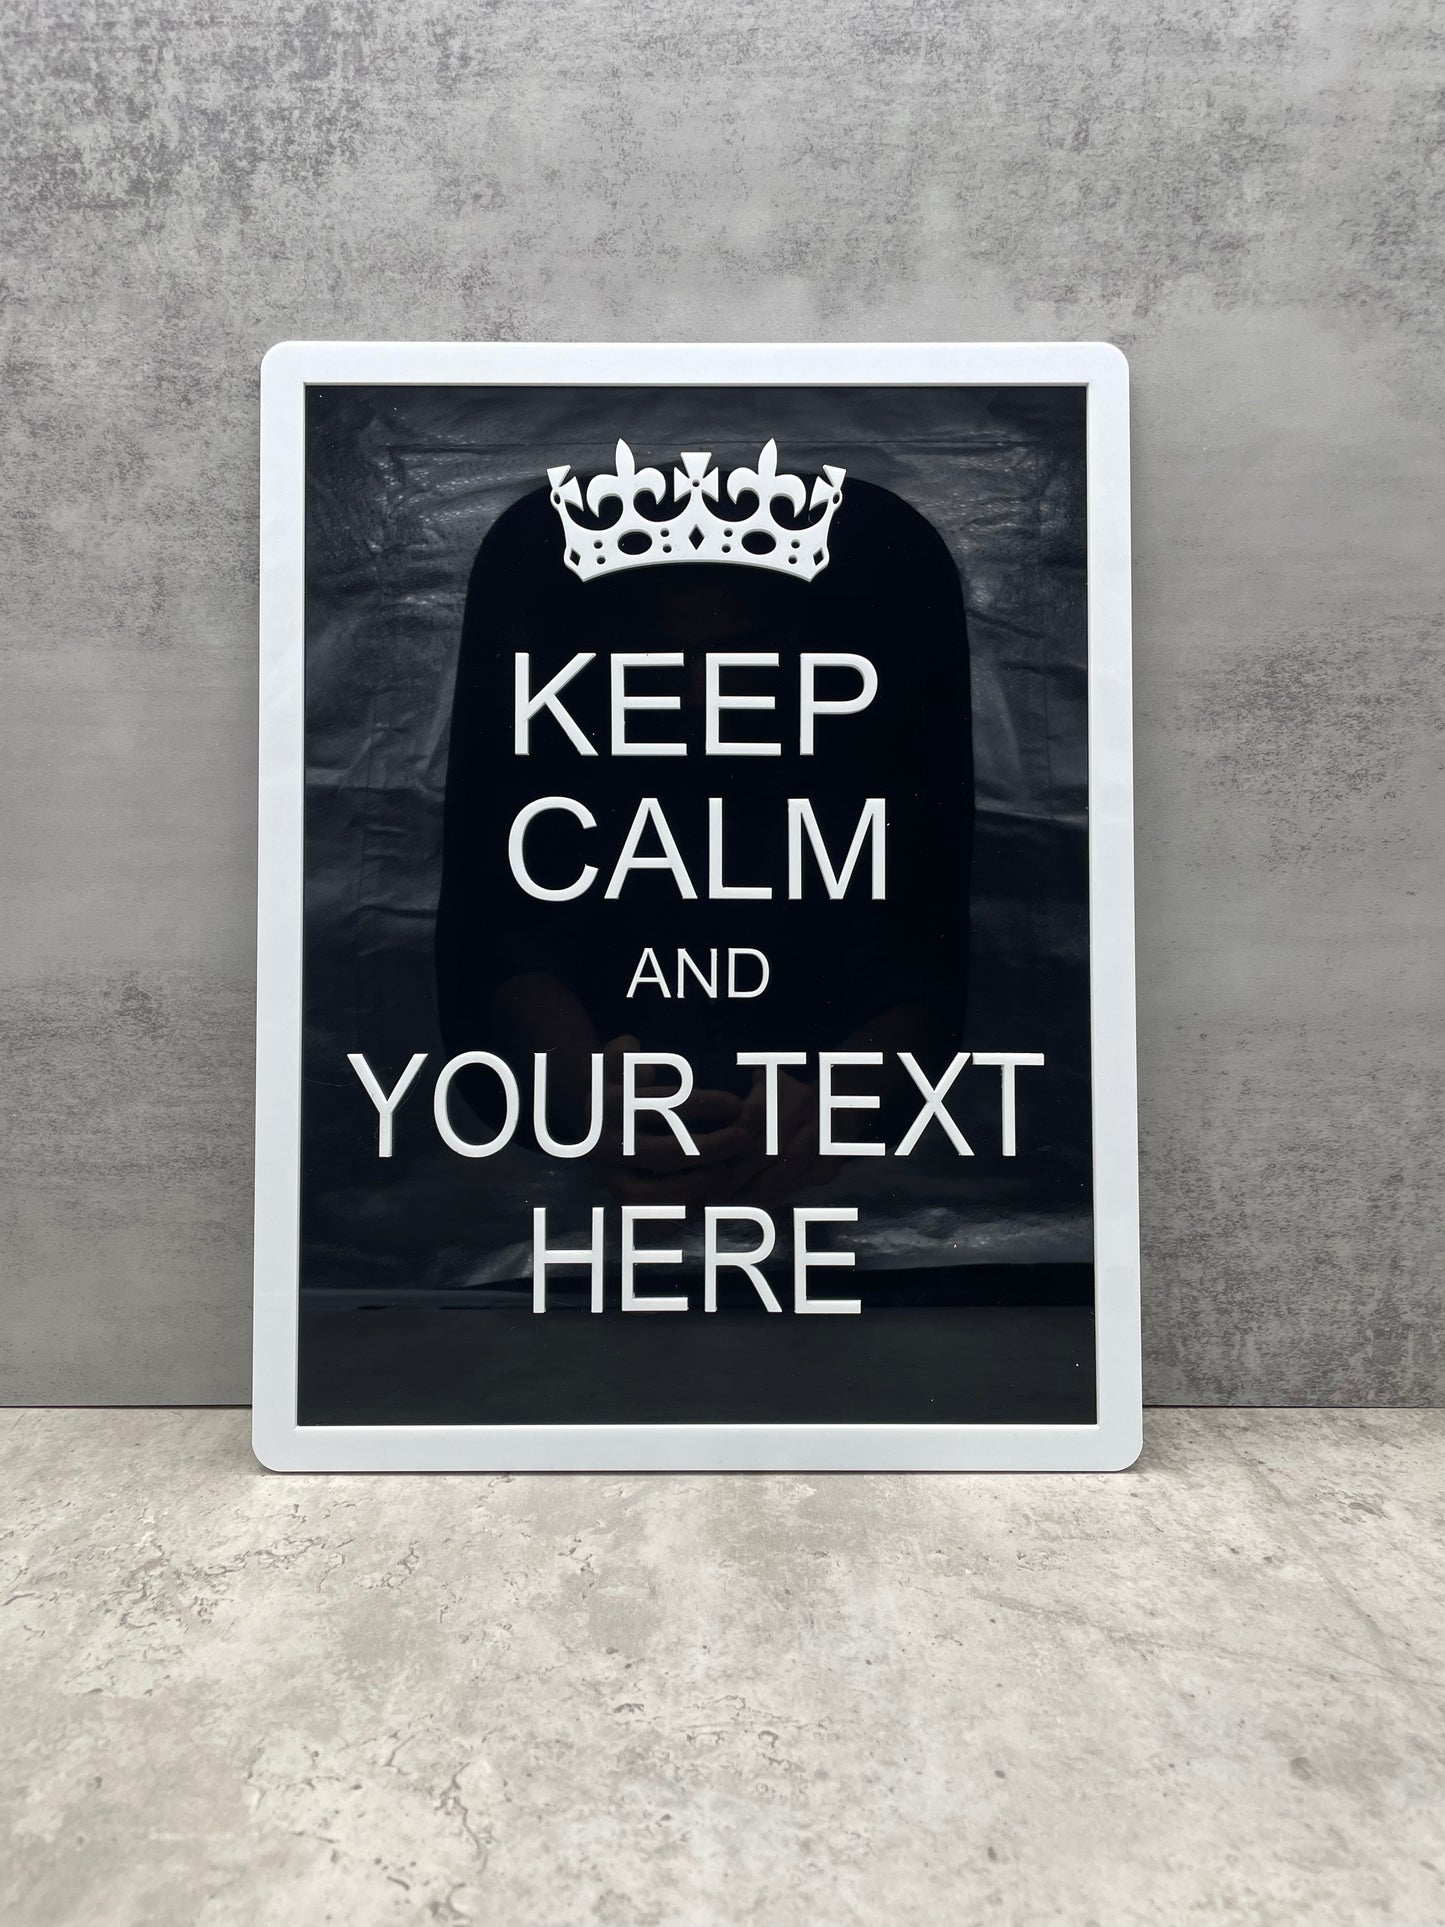 keep calm and carry on custom sign in black and white